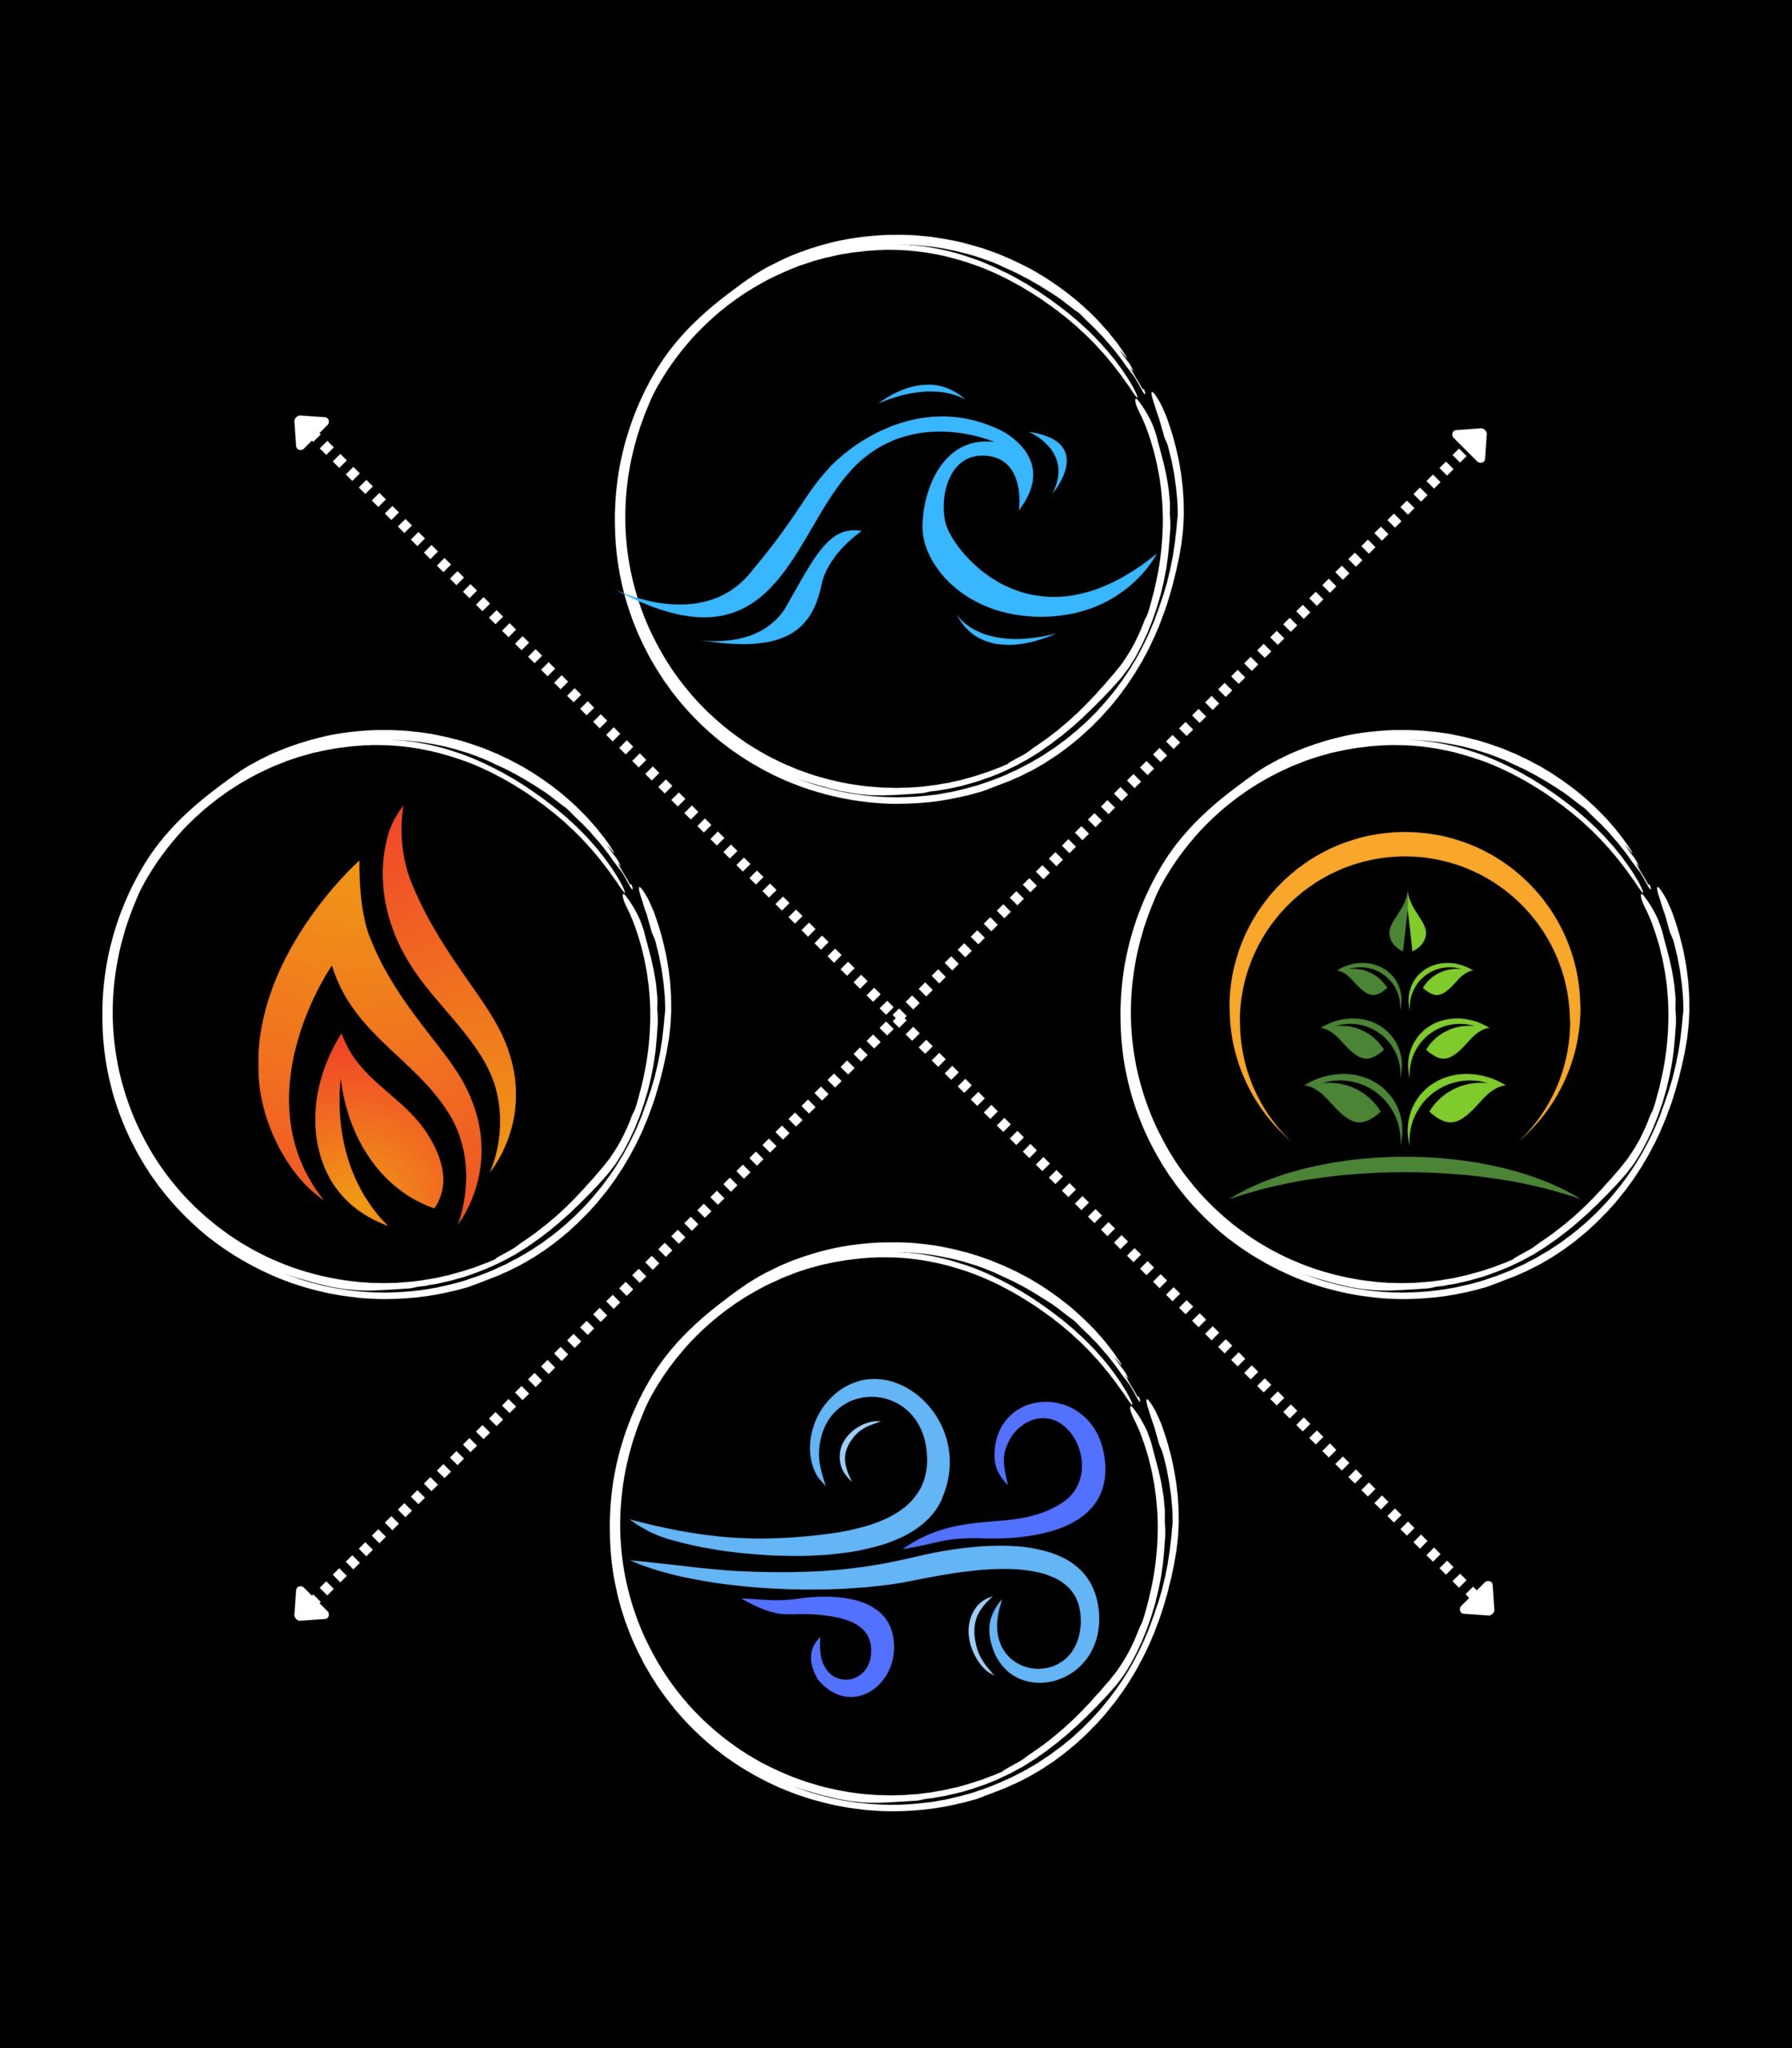 Find meaning and sacredness in everyday life using the 4 elements